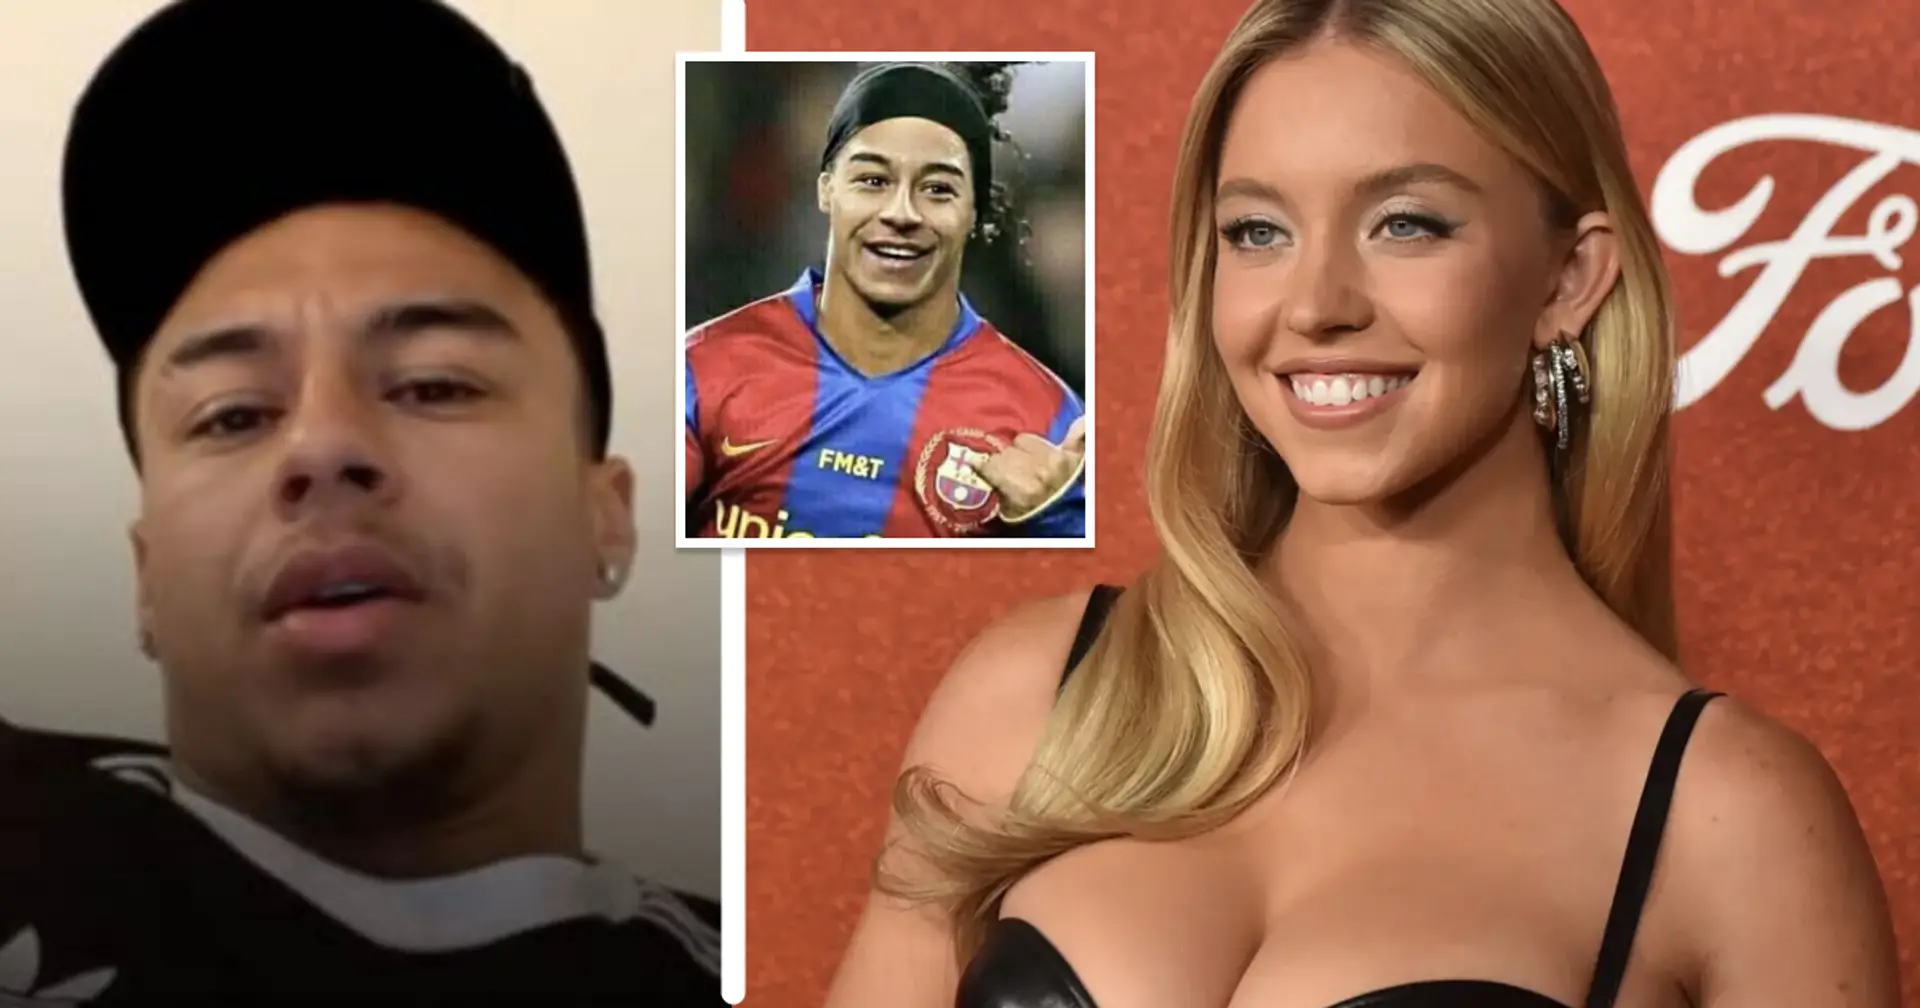 'Inspired me to offer myself to Sydney Sweeney': Global fans react to Barca's Lingard links